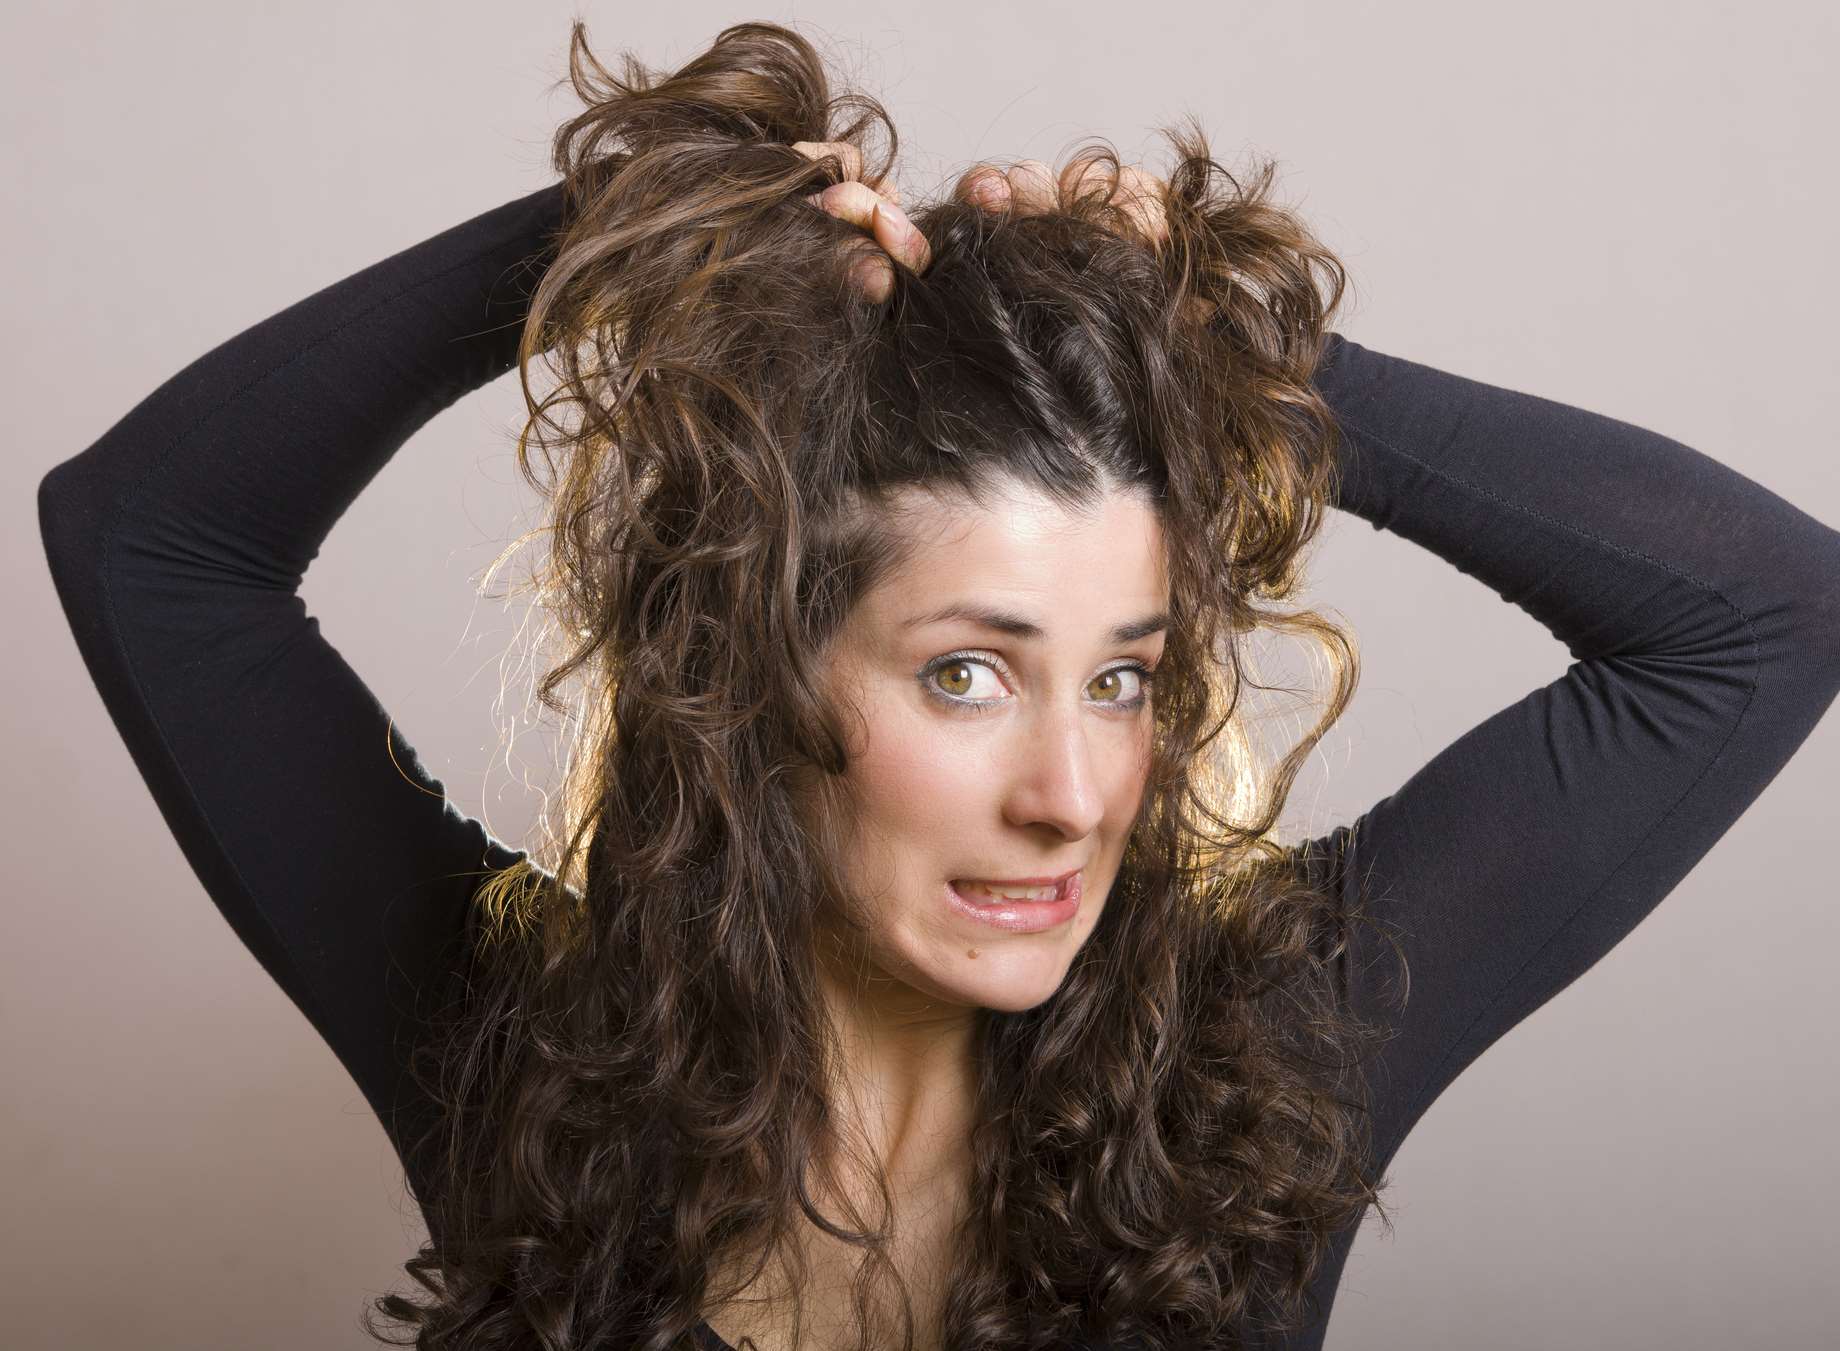 Millions of busy British women rely on hair hacks like dry shampoo